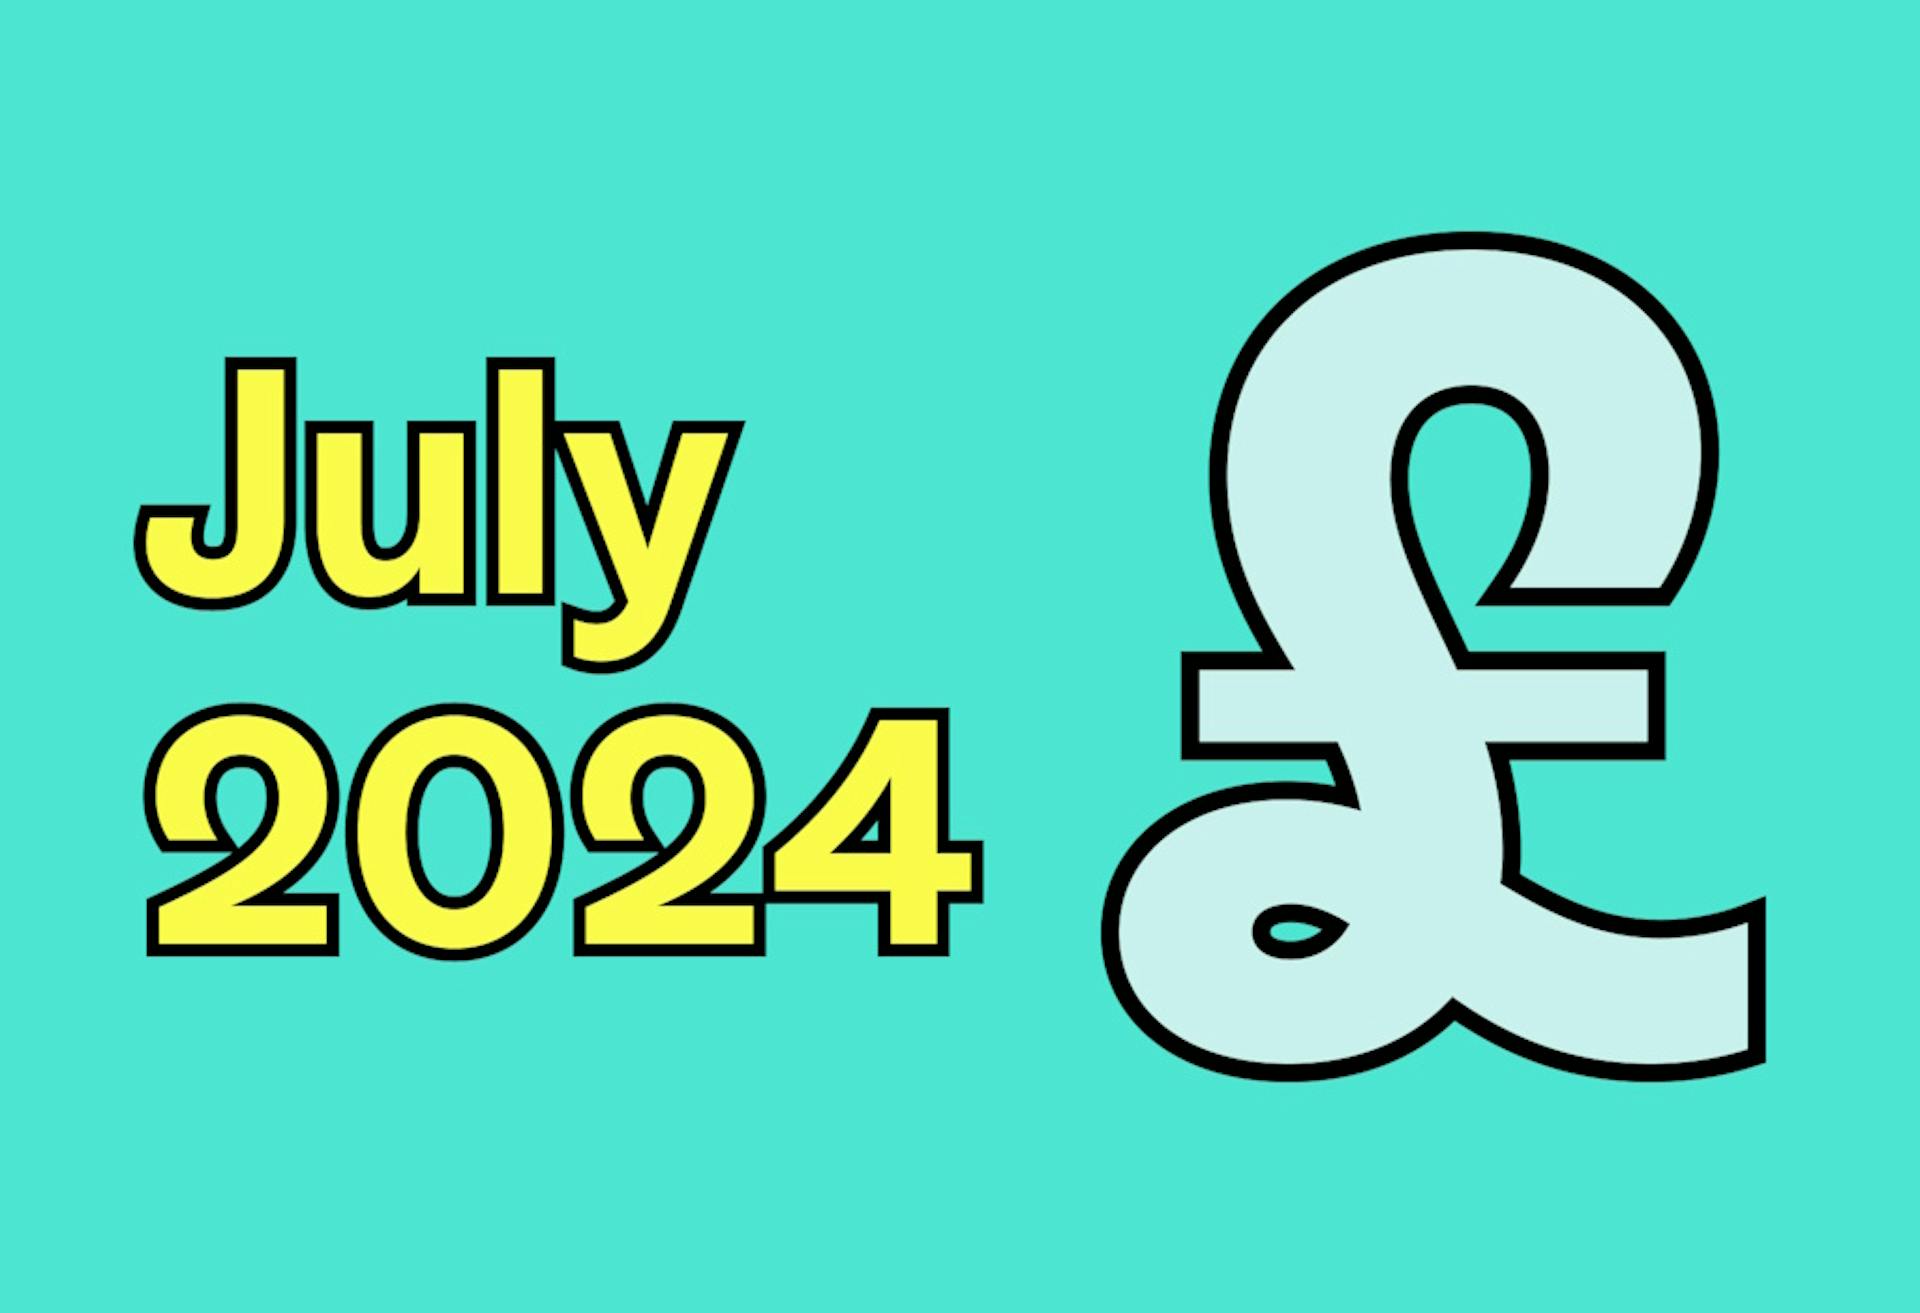 The phrase 'July 2024' in yellow with a black outline on the left, next to a large pound sign in blue with a black outline on the right, both set against an aquamarine background